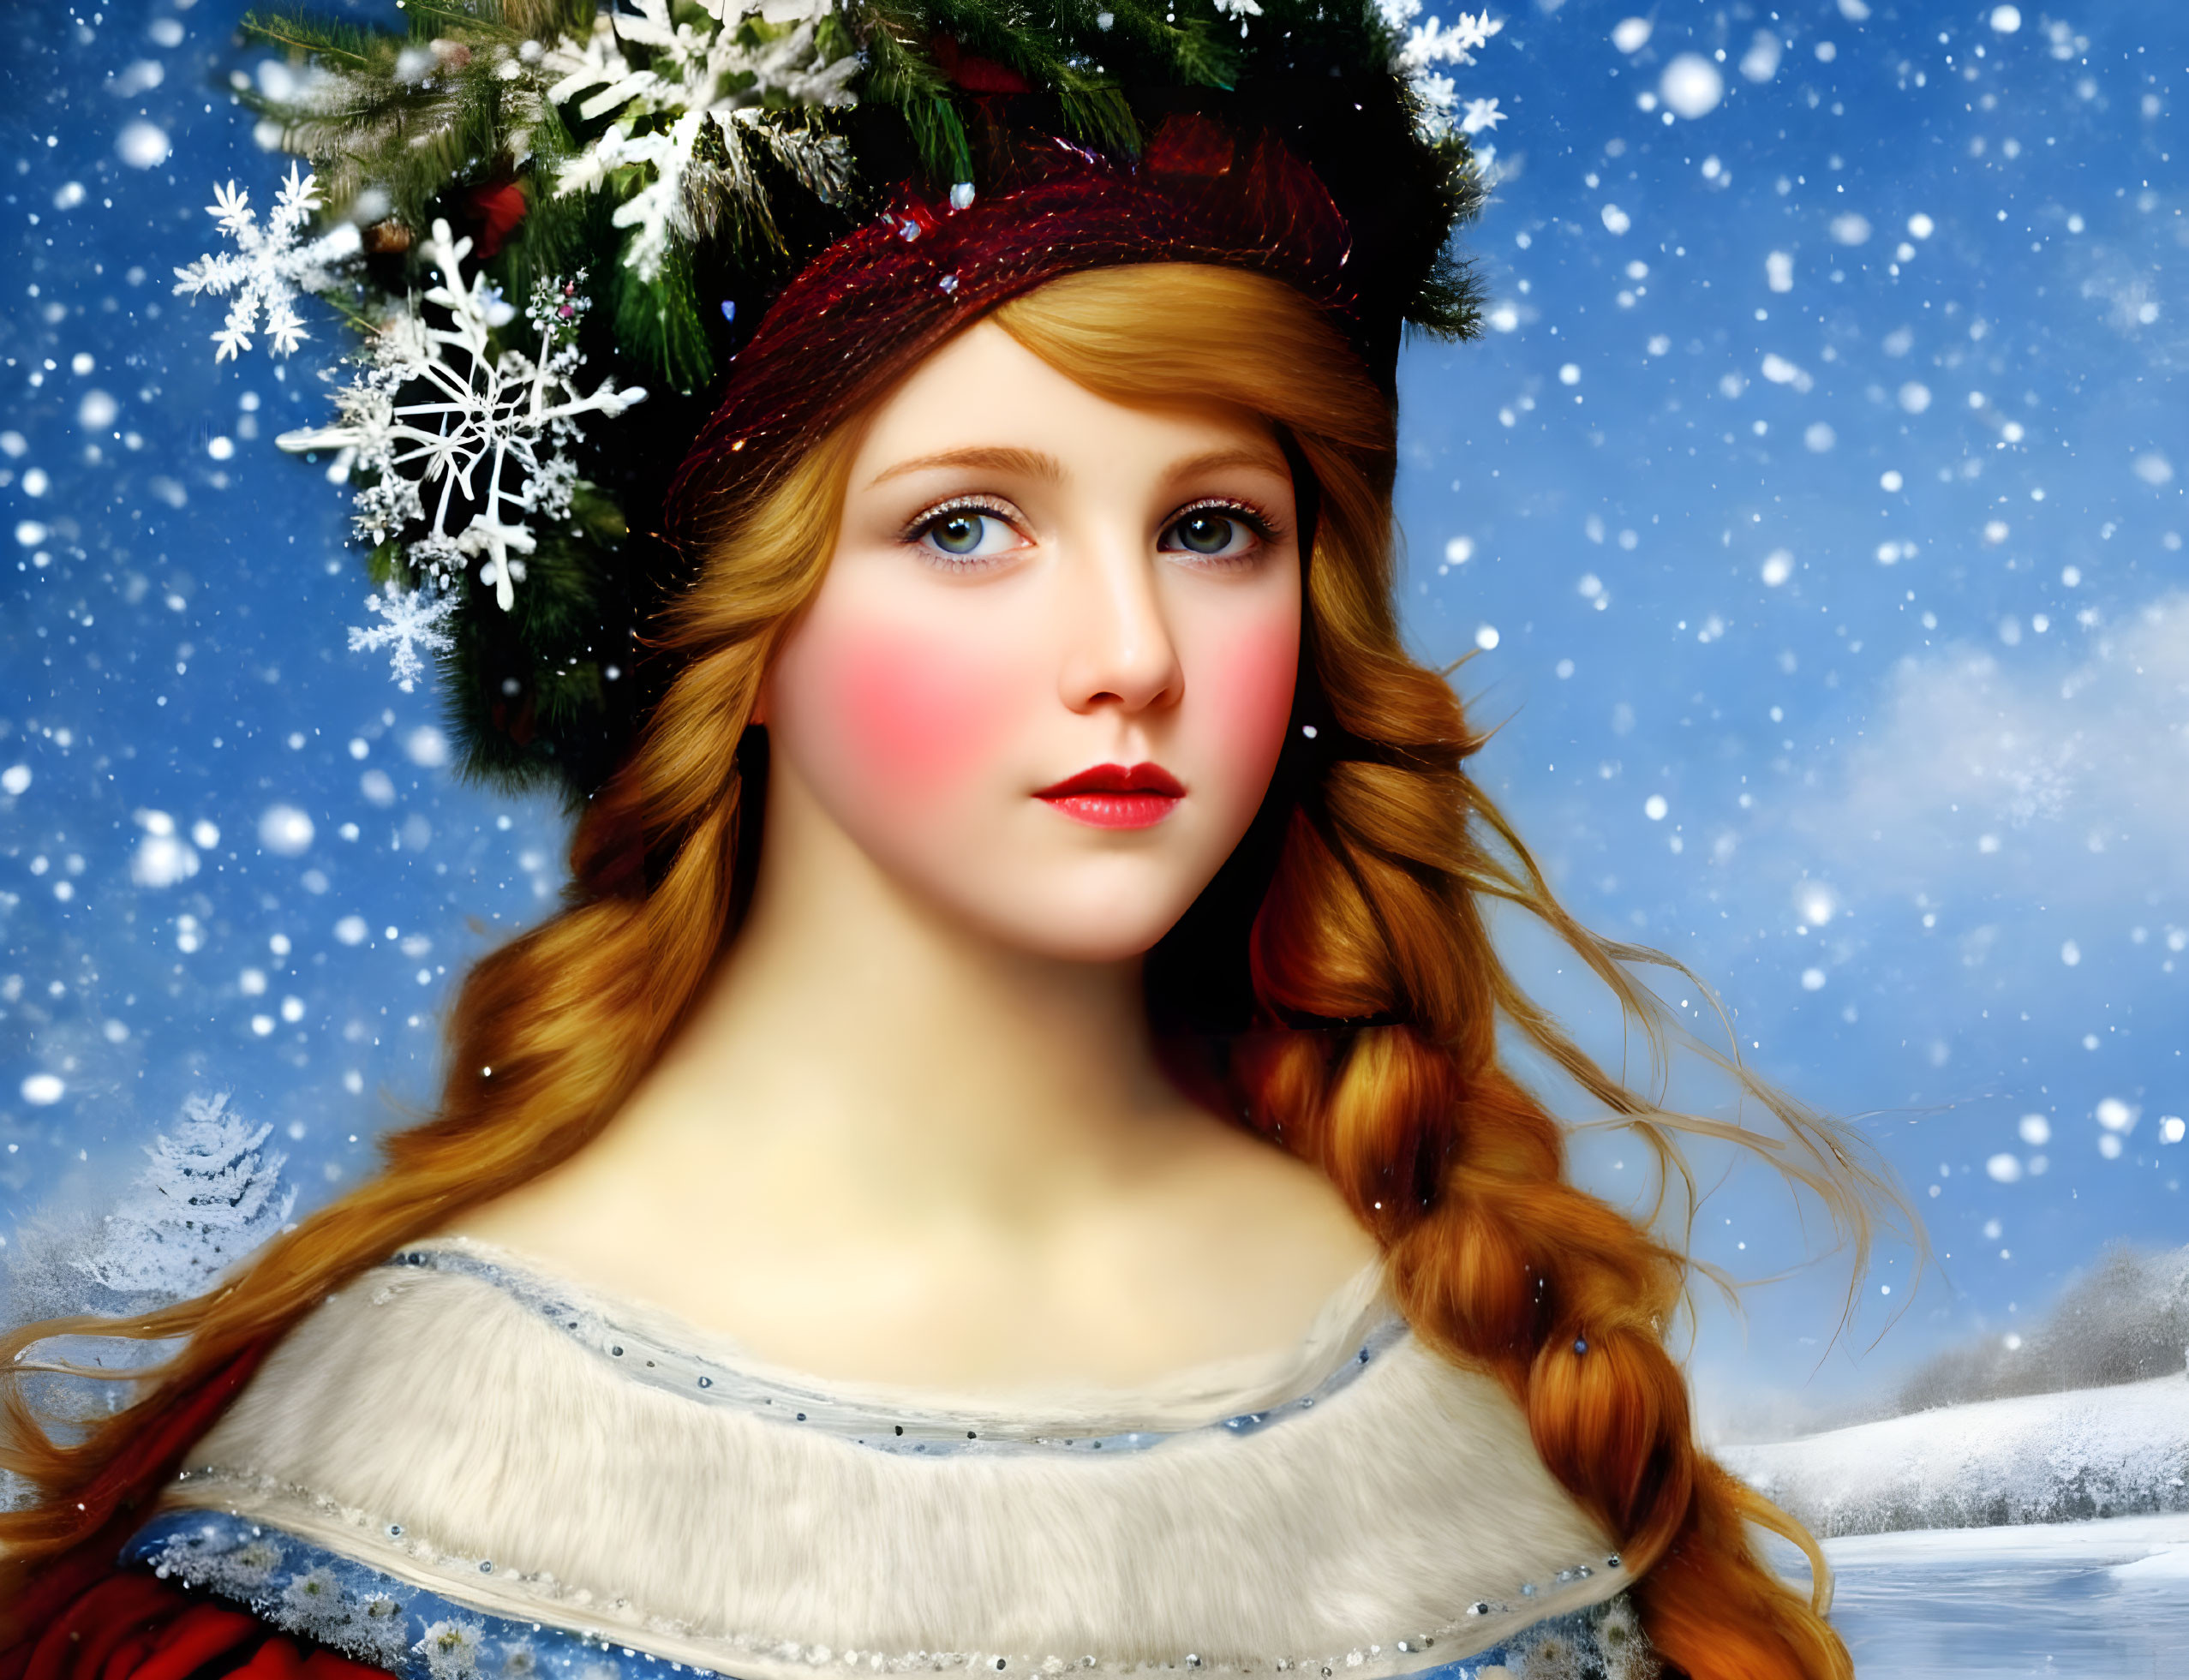 Digital portrait of young woman with wavy red hair in winter clothing and headband, set in win